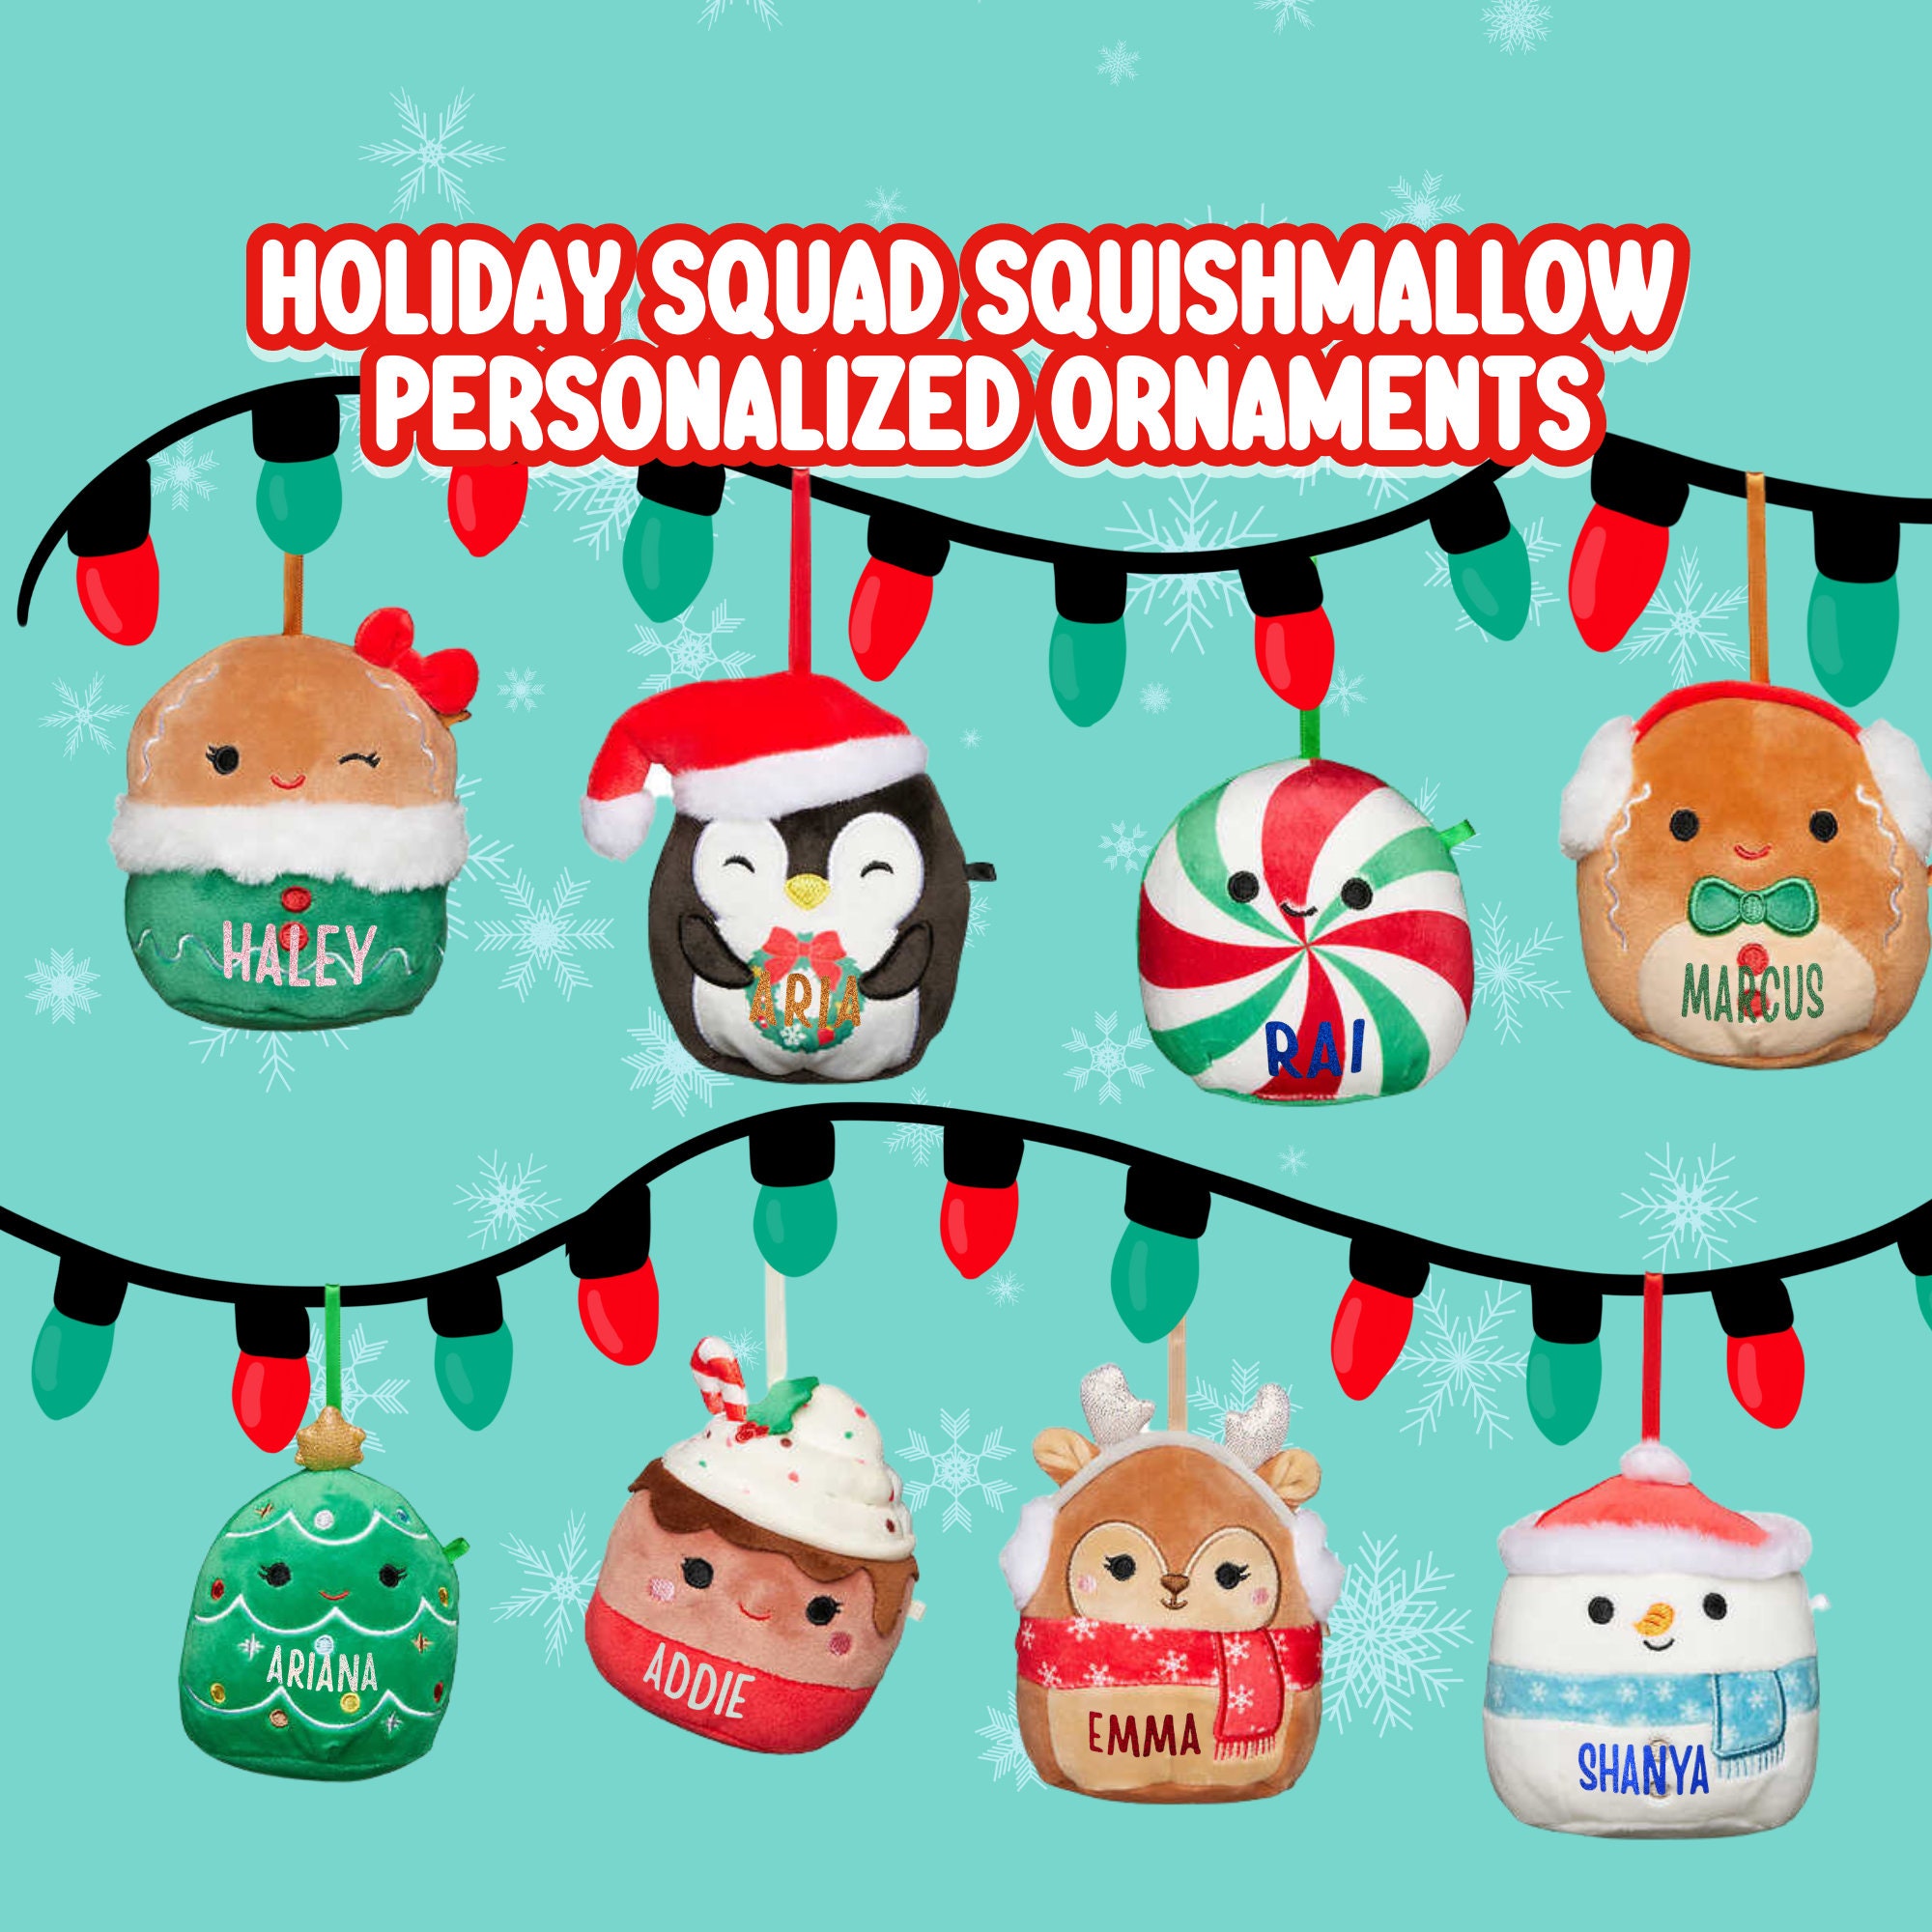 NEW Squishville Squishmallows Advent Calendar Holiday Christmas